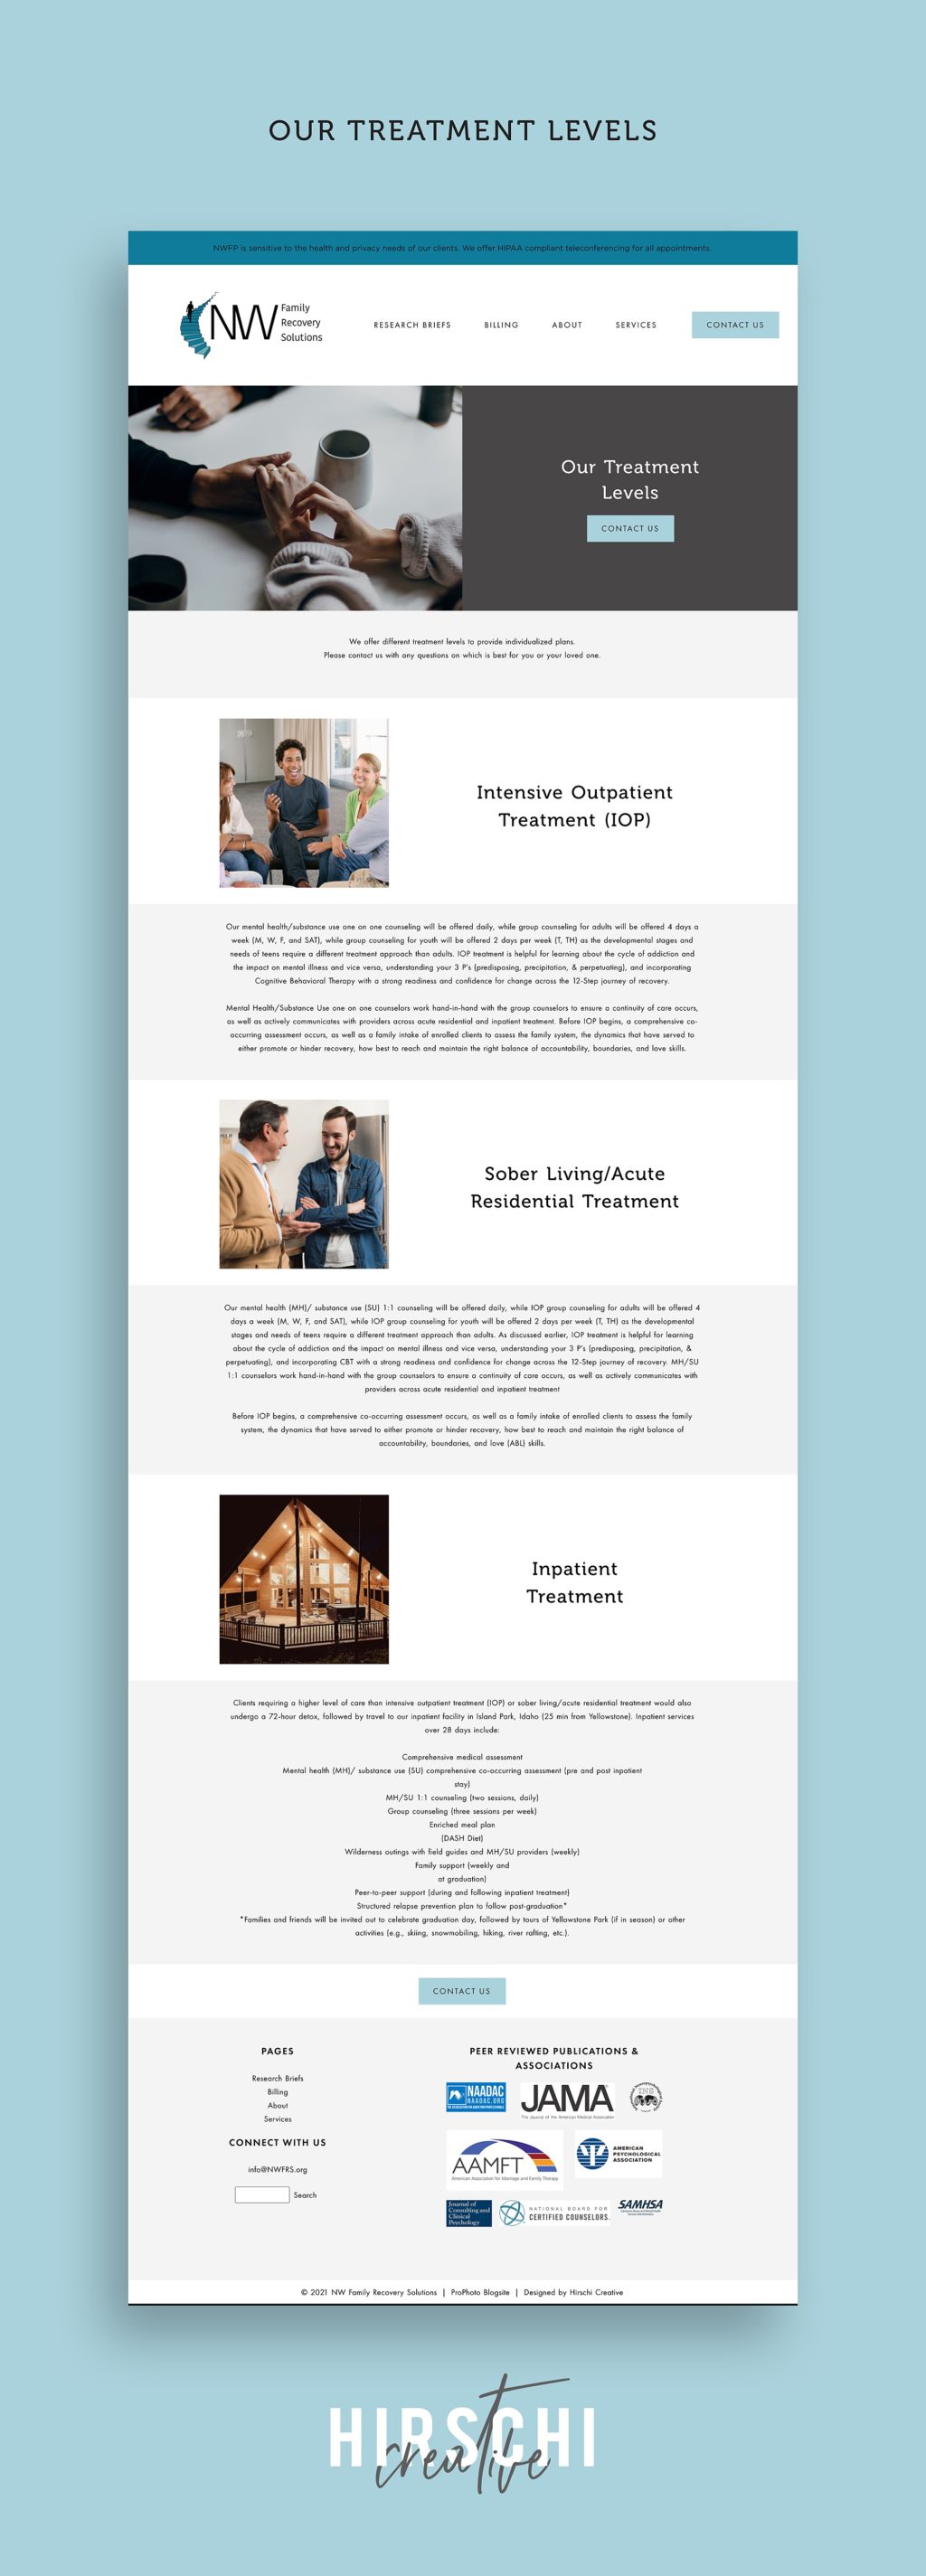 utah_website_designer_prophoto_template_styling_branding_colors_mood_design_recovery_solutions